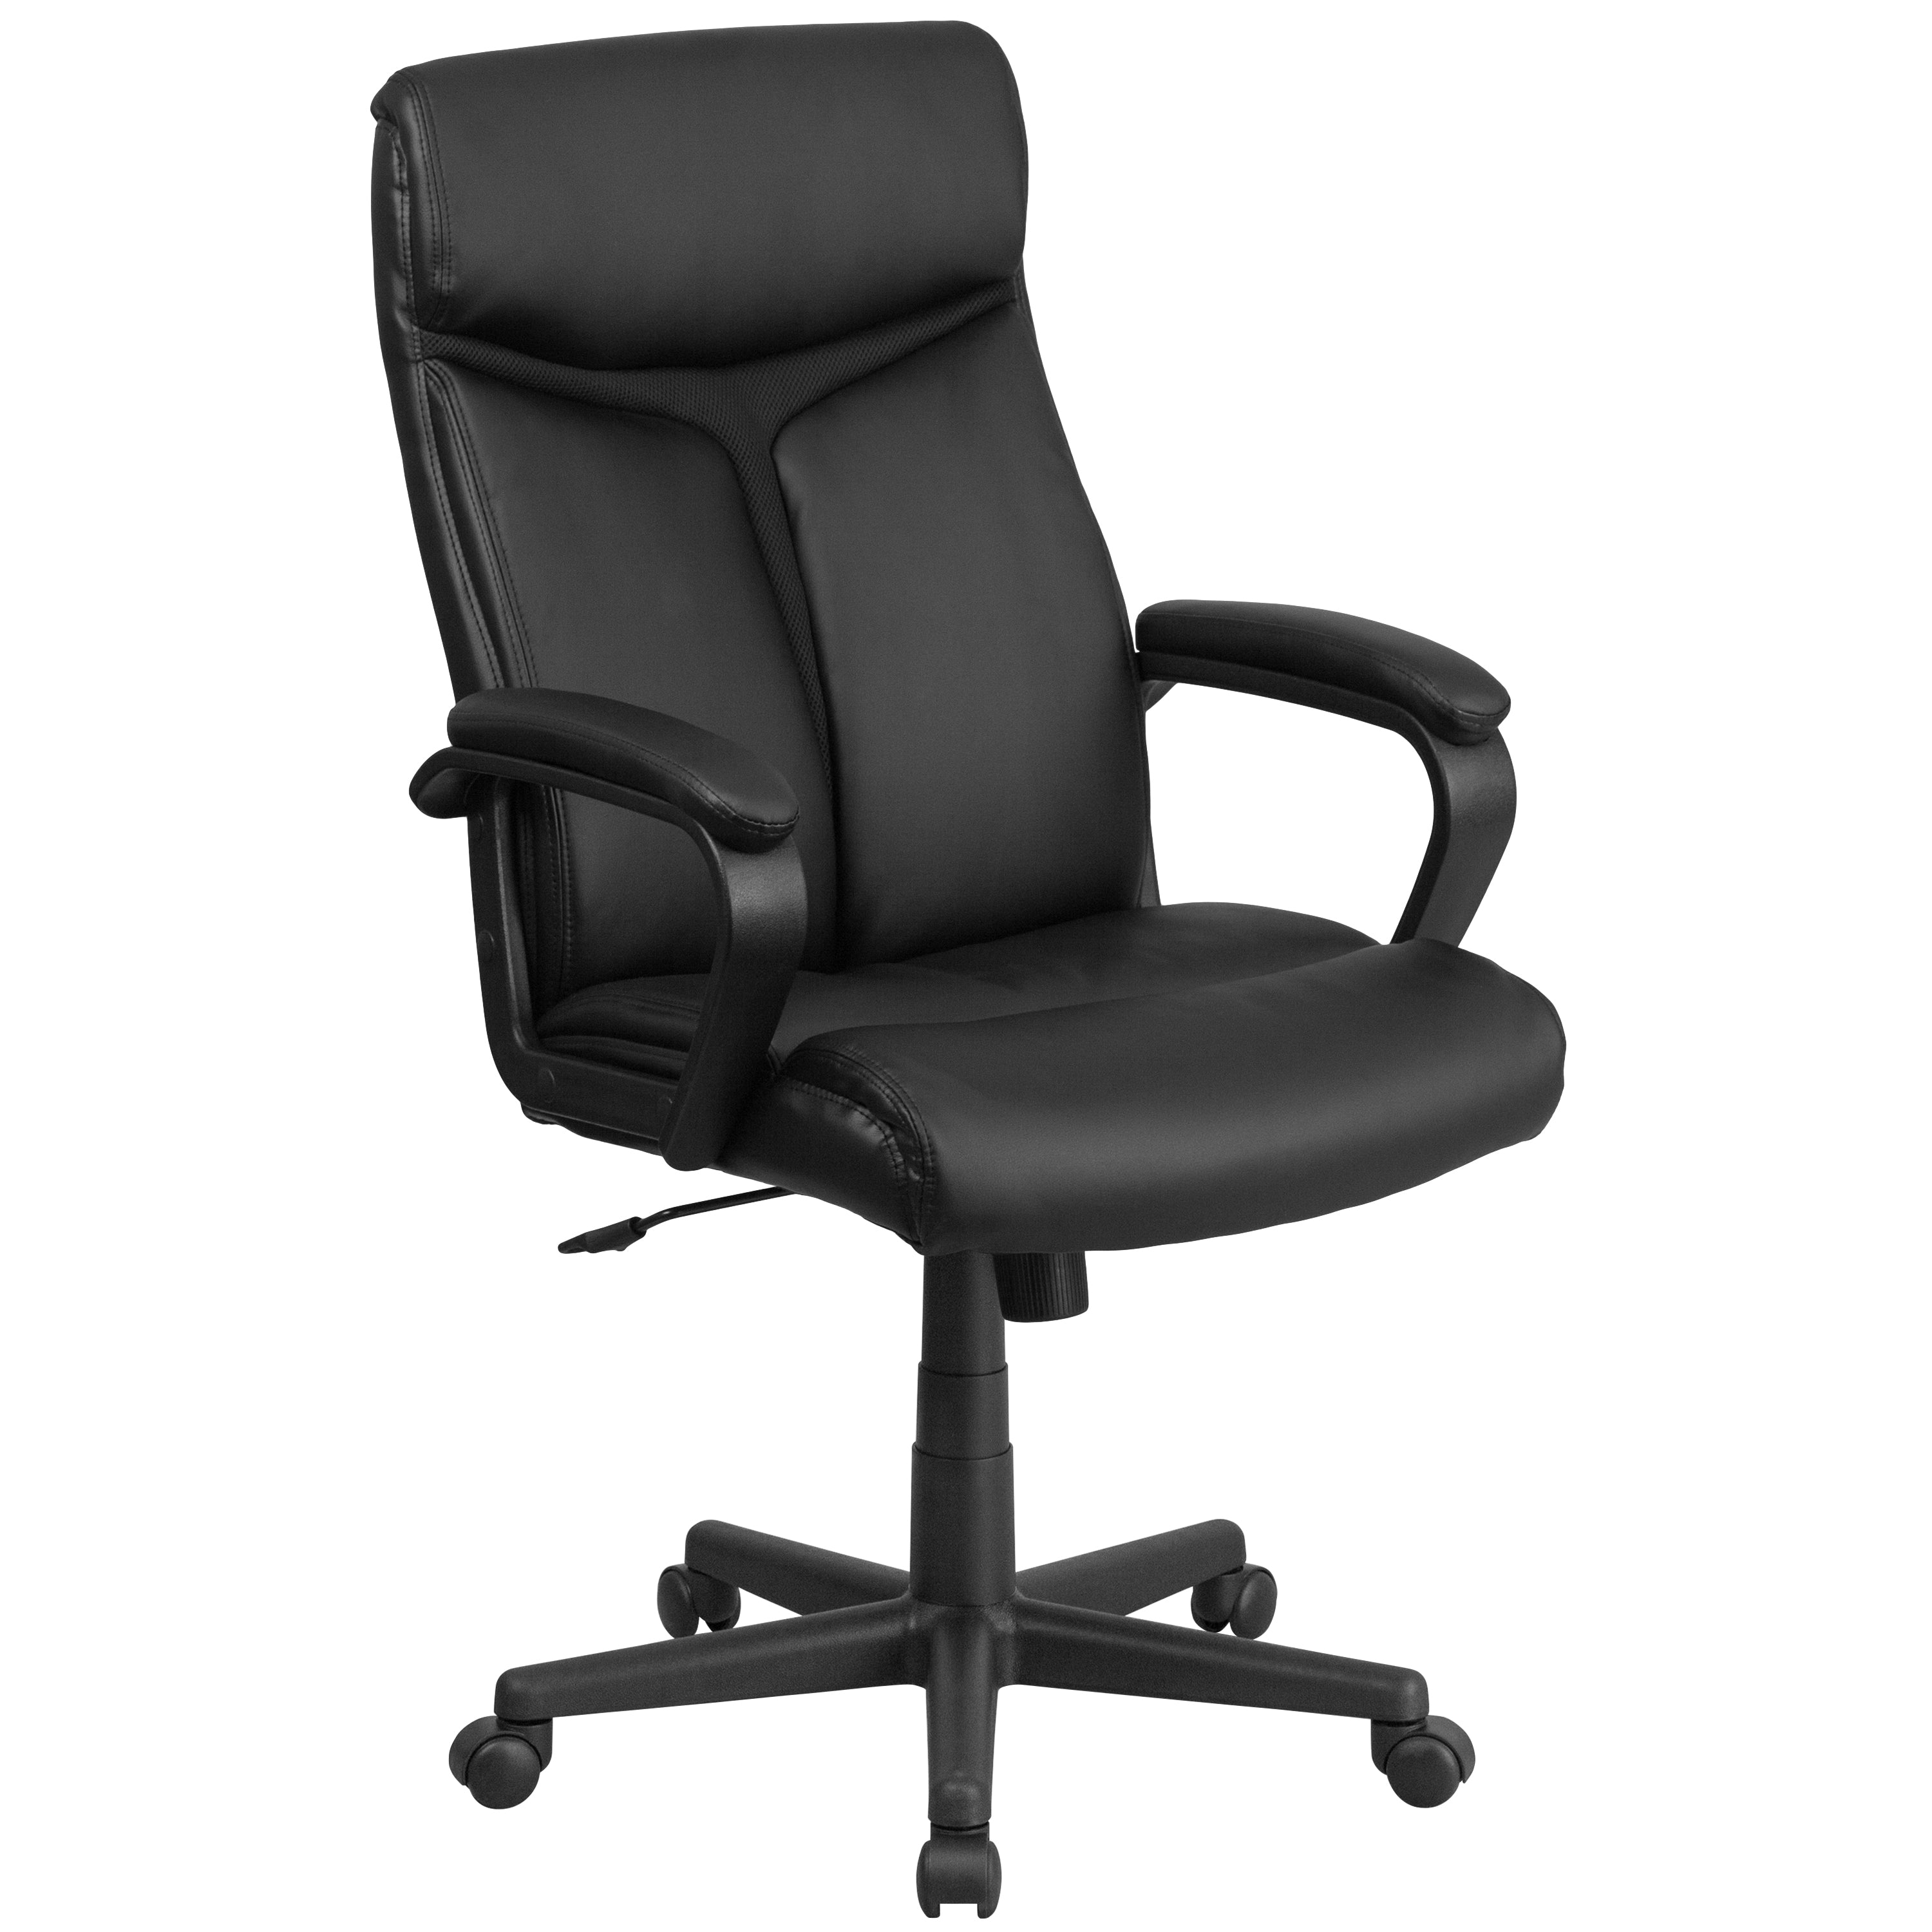 High Back LeatherSoft Executive Swivel Office Chair with Slight Mesh Accent and Arms-Office Chair-Flash Furniture-Wall2Wall Furnishings